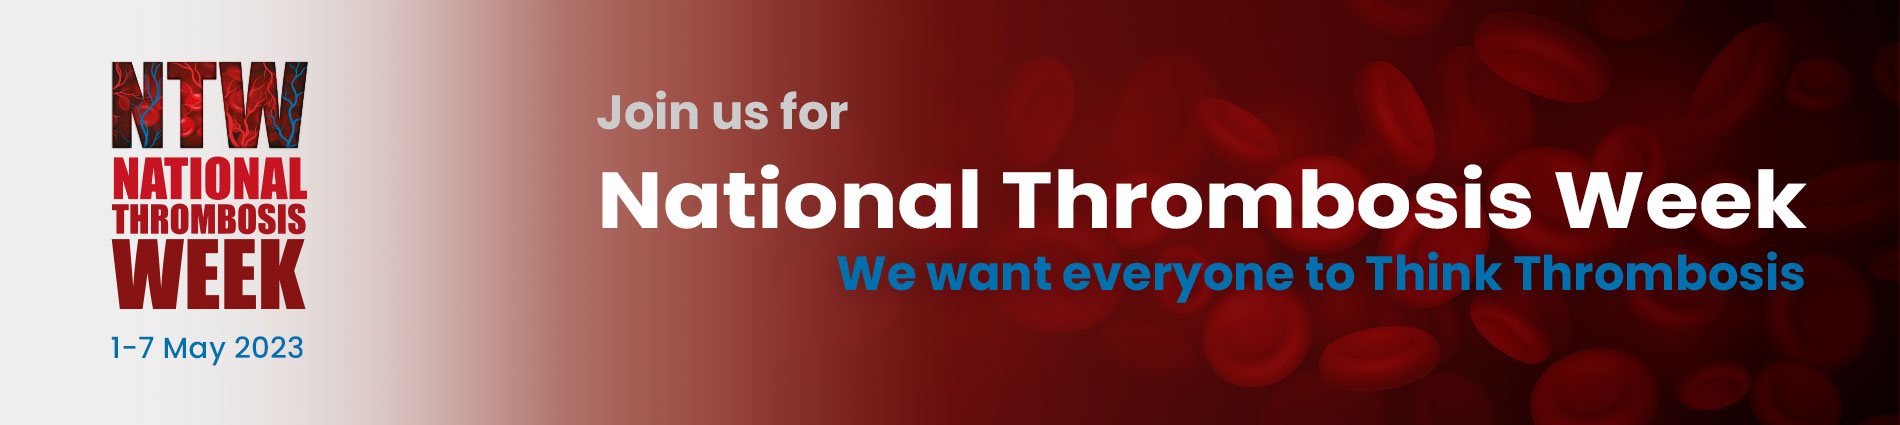 National Thrombosis Week 2023 | We want everyone to Think Thrombosis